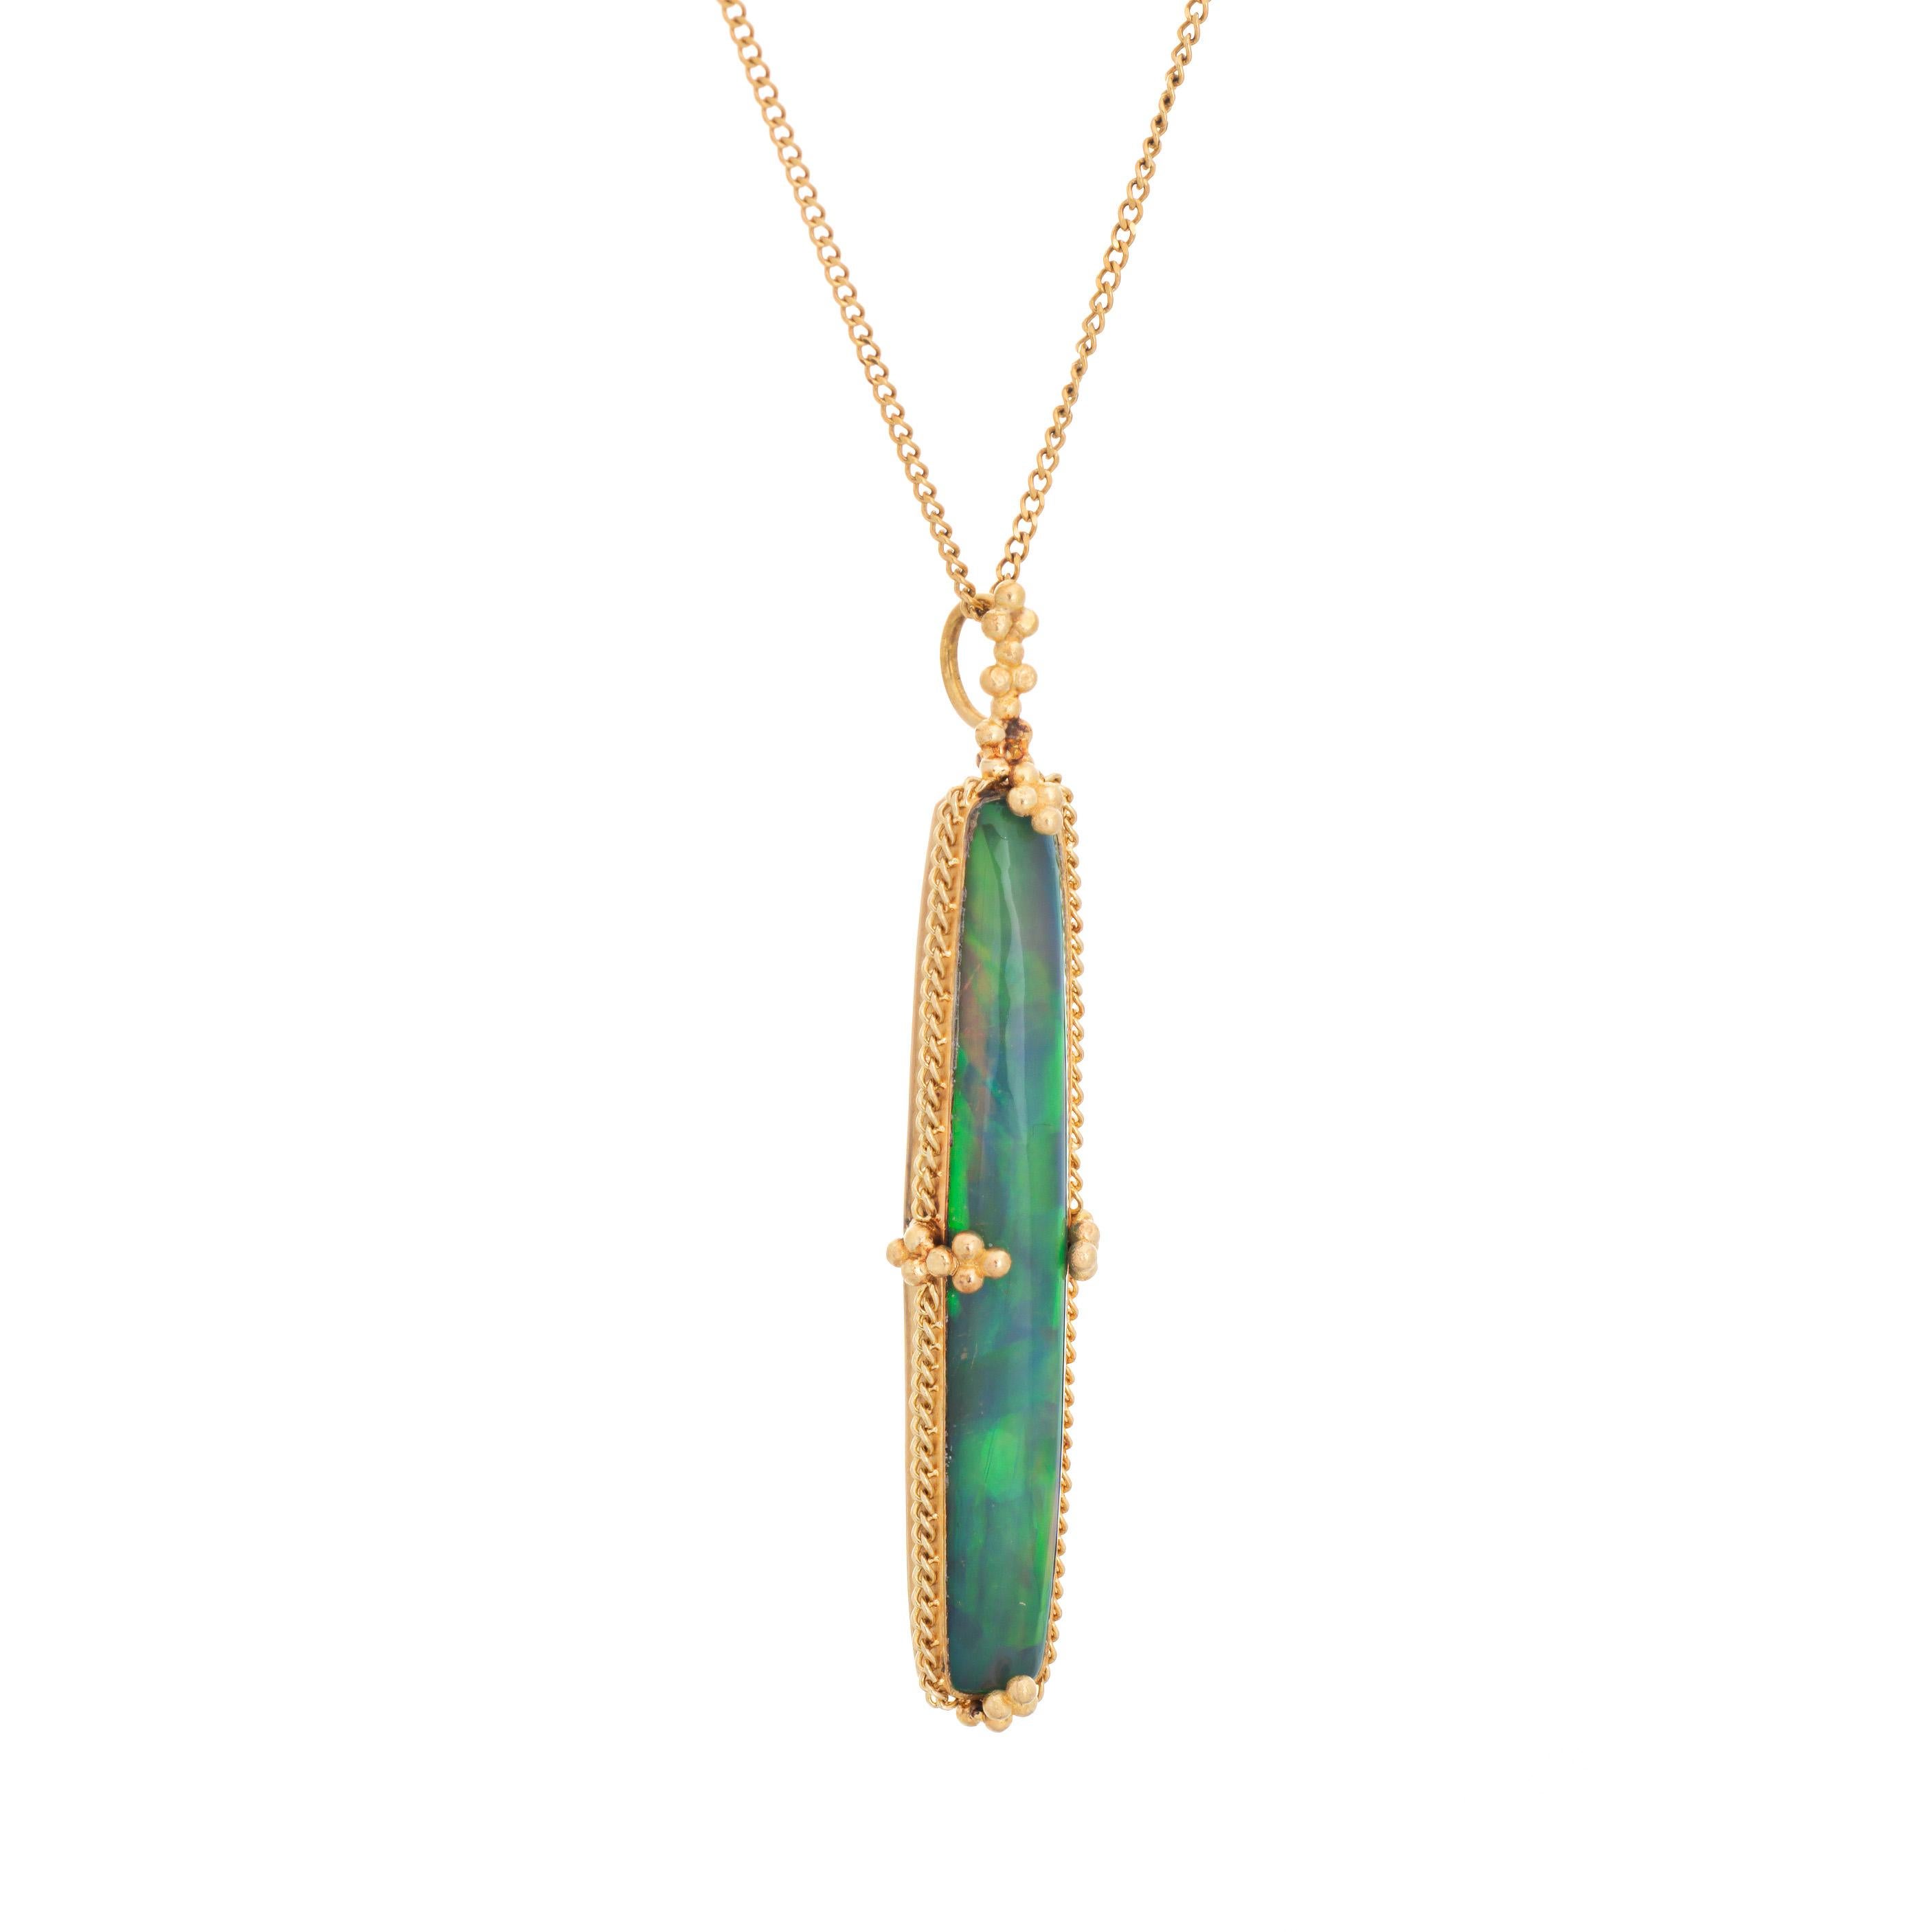 Elegant and finely detailed contemporary estate semi black opal pendant & necklace crafted in 18 karat yellow gold.  

Semi black opal measures 37mm x 6mm. The opal is in very good condition and free of cracks or chips. 

The opal exhibits vivid